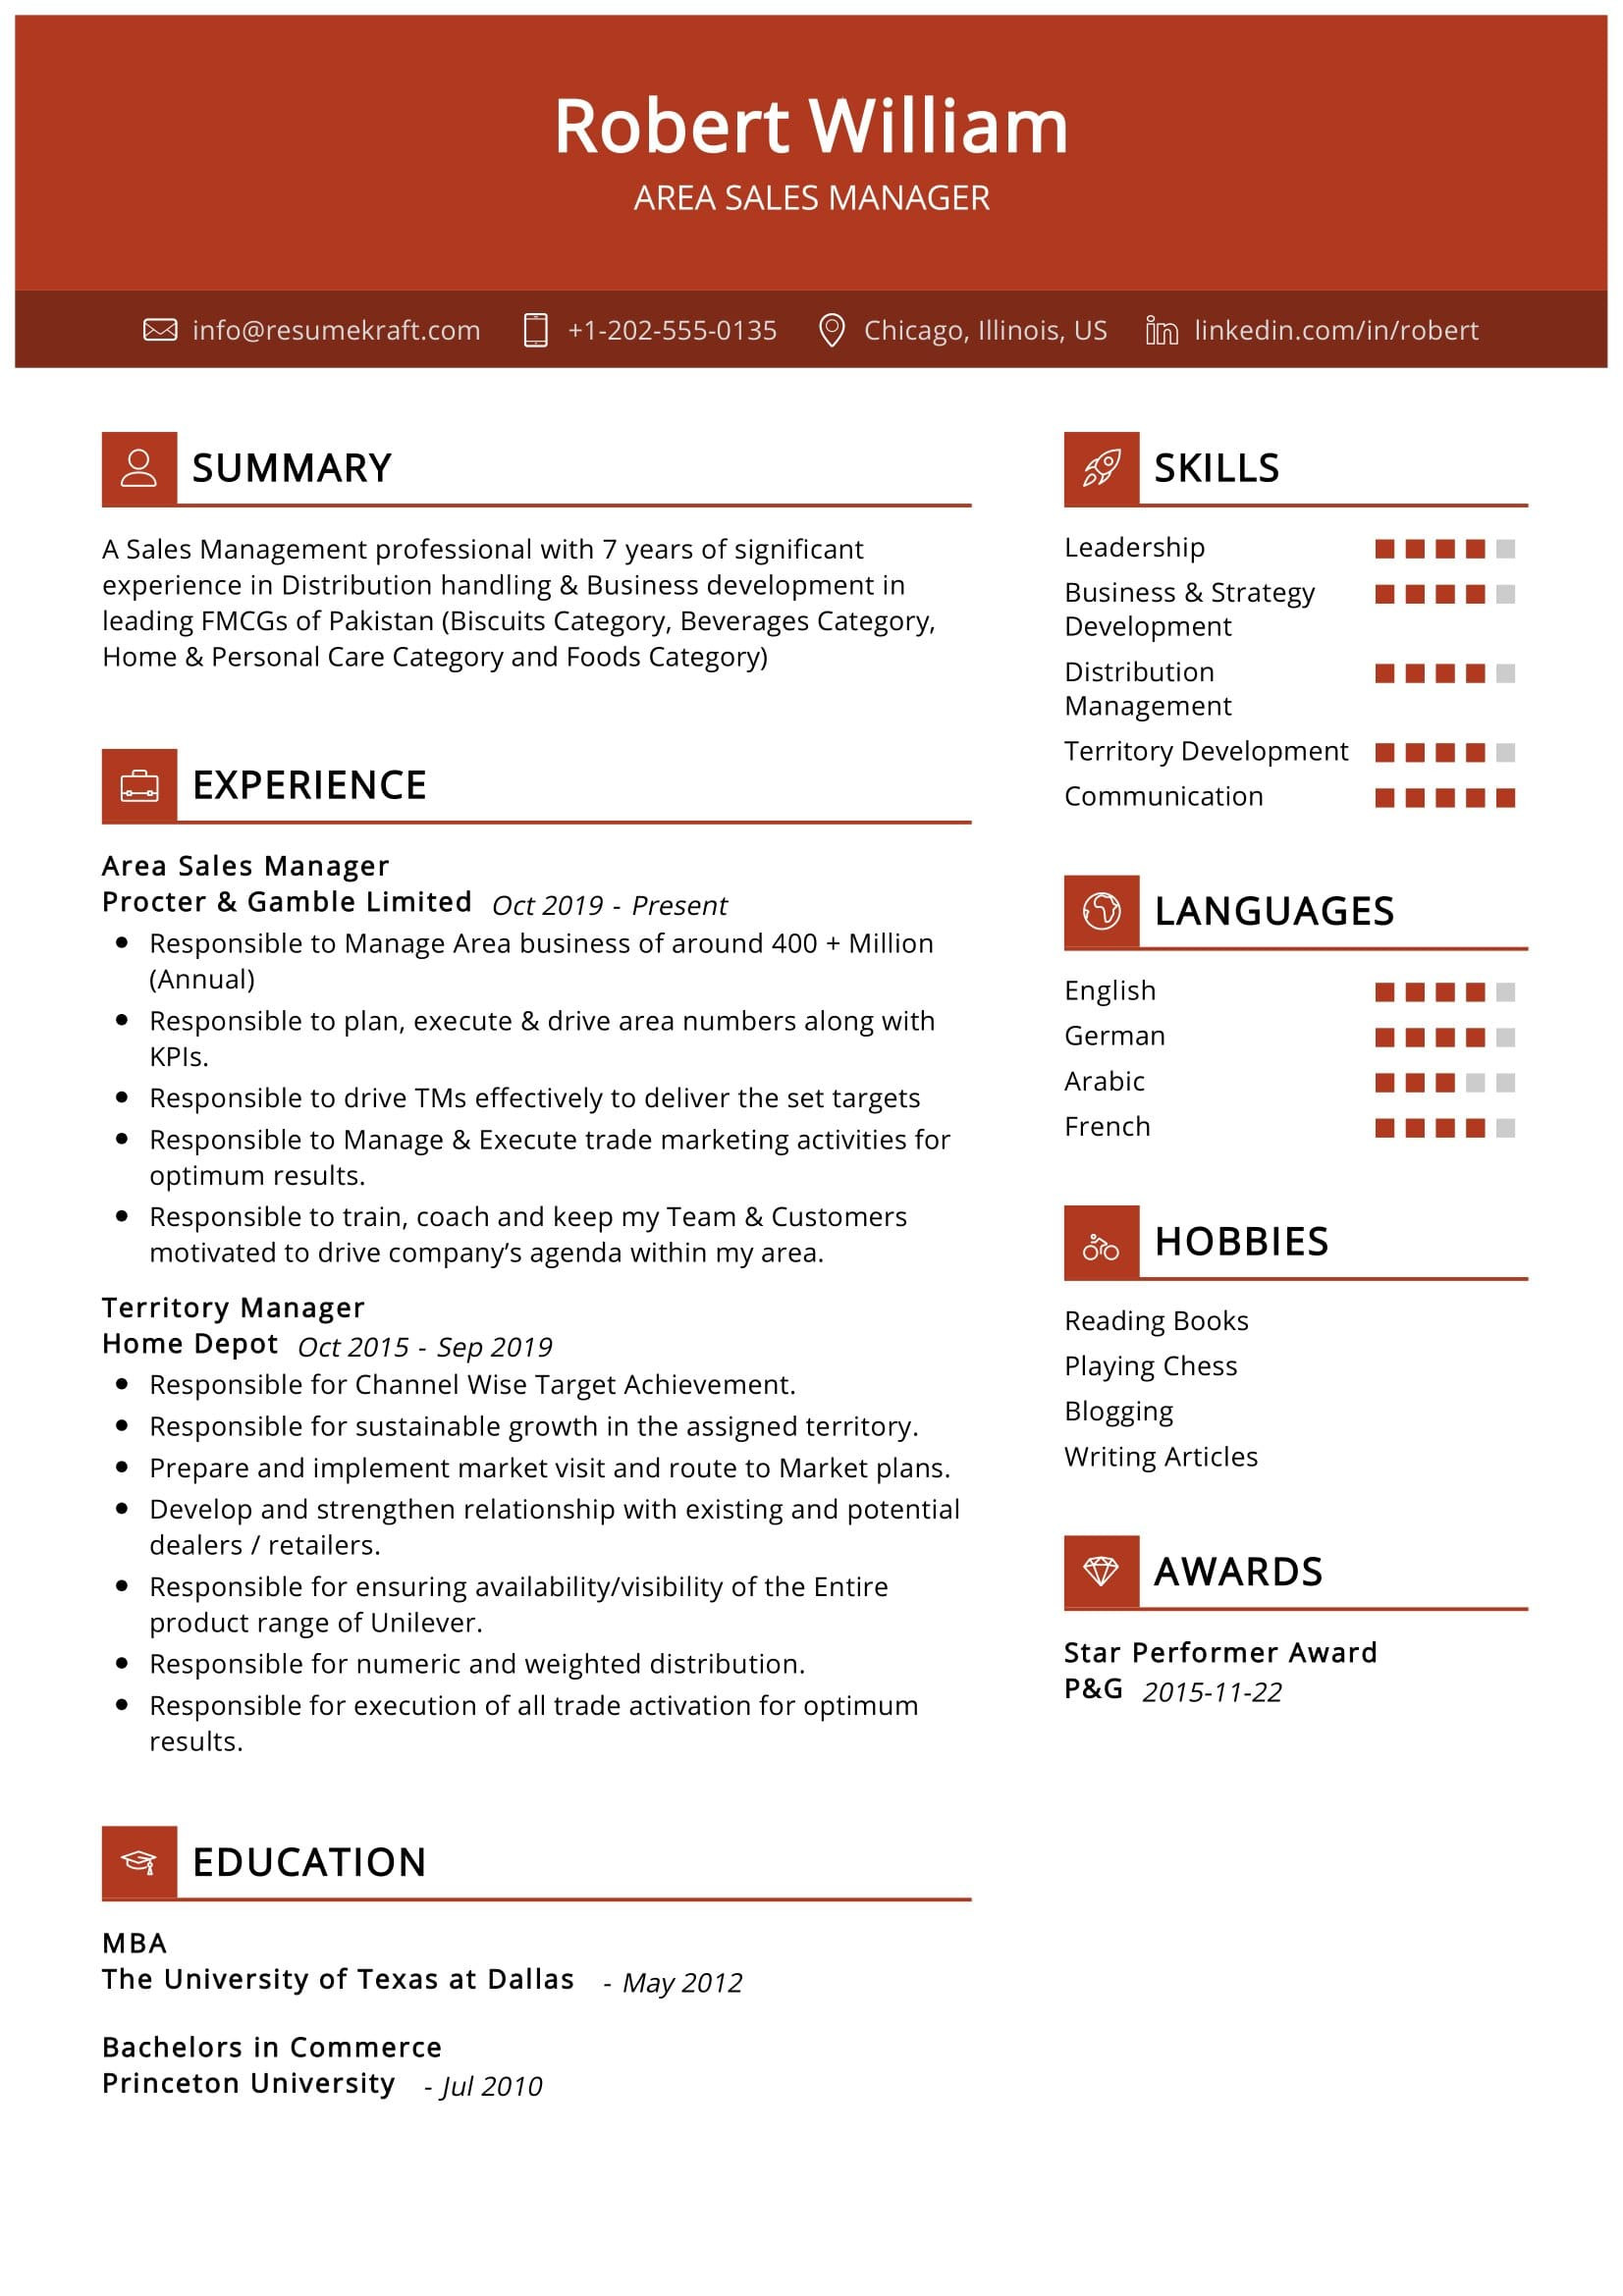 Sample Resume A Sales Manager Procter and Gamble area Sales Manager Resume Sample 2022 Writing Tips – Resumekraft